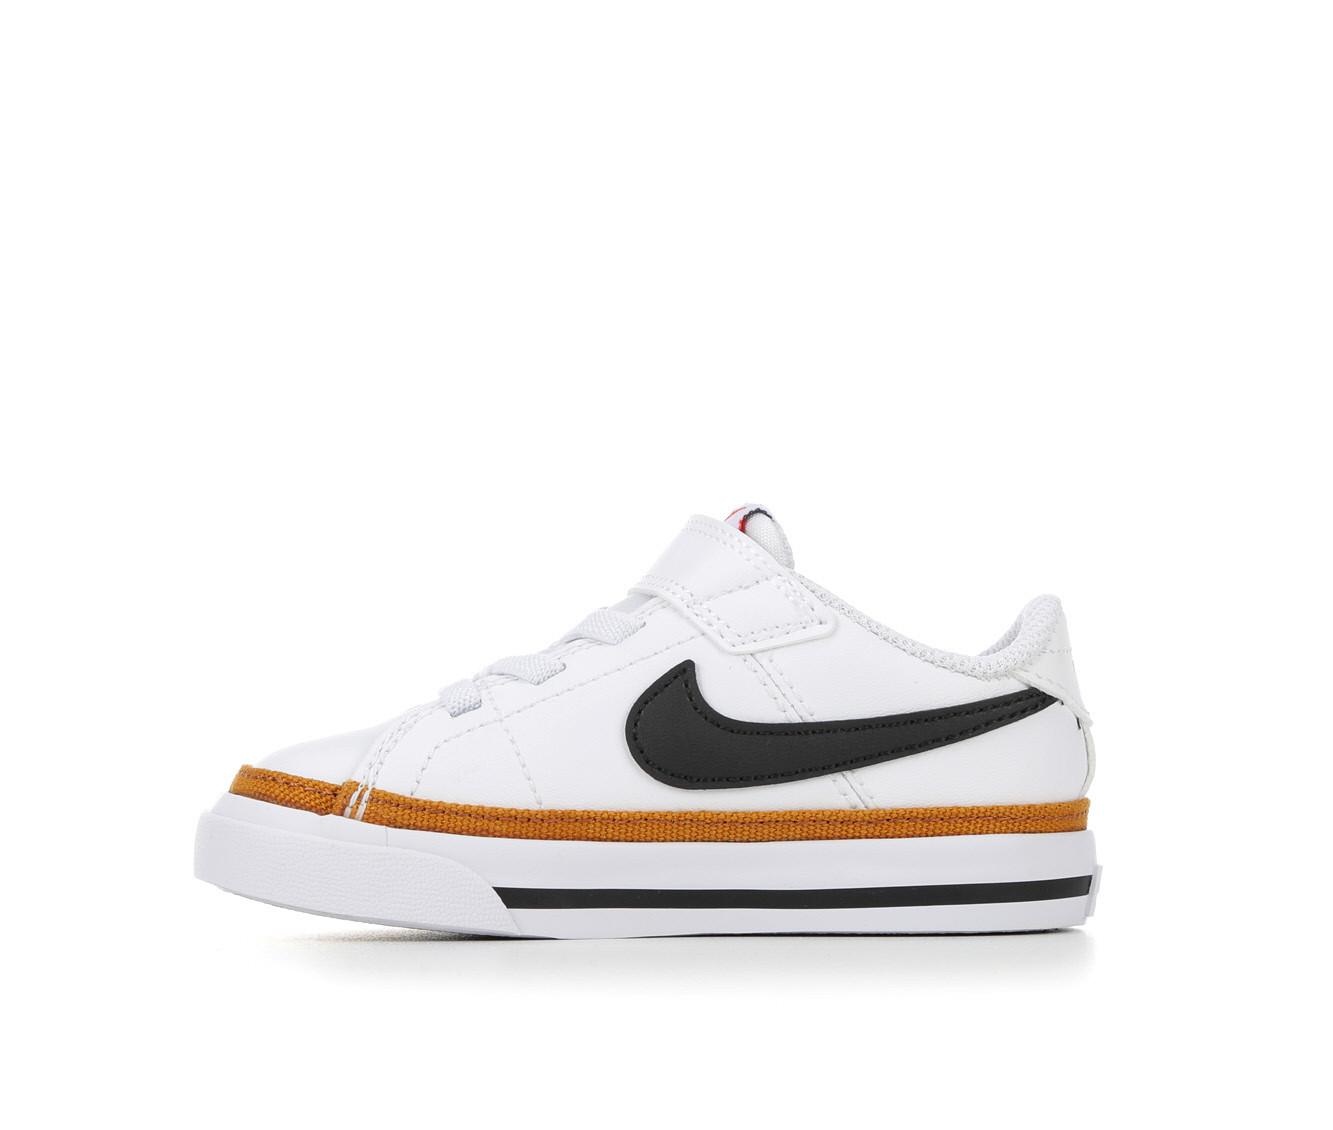 Kids' Nike Infant & Toddler Court Legacy Special Edition Sneakers